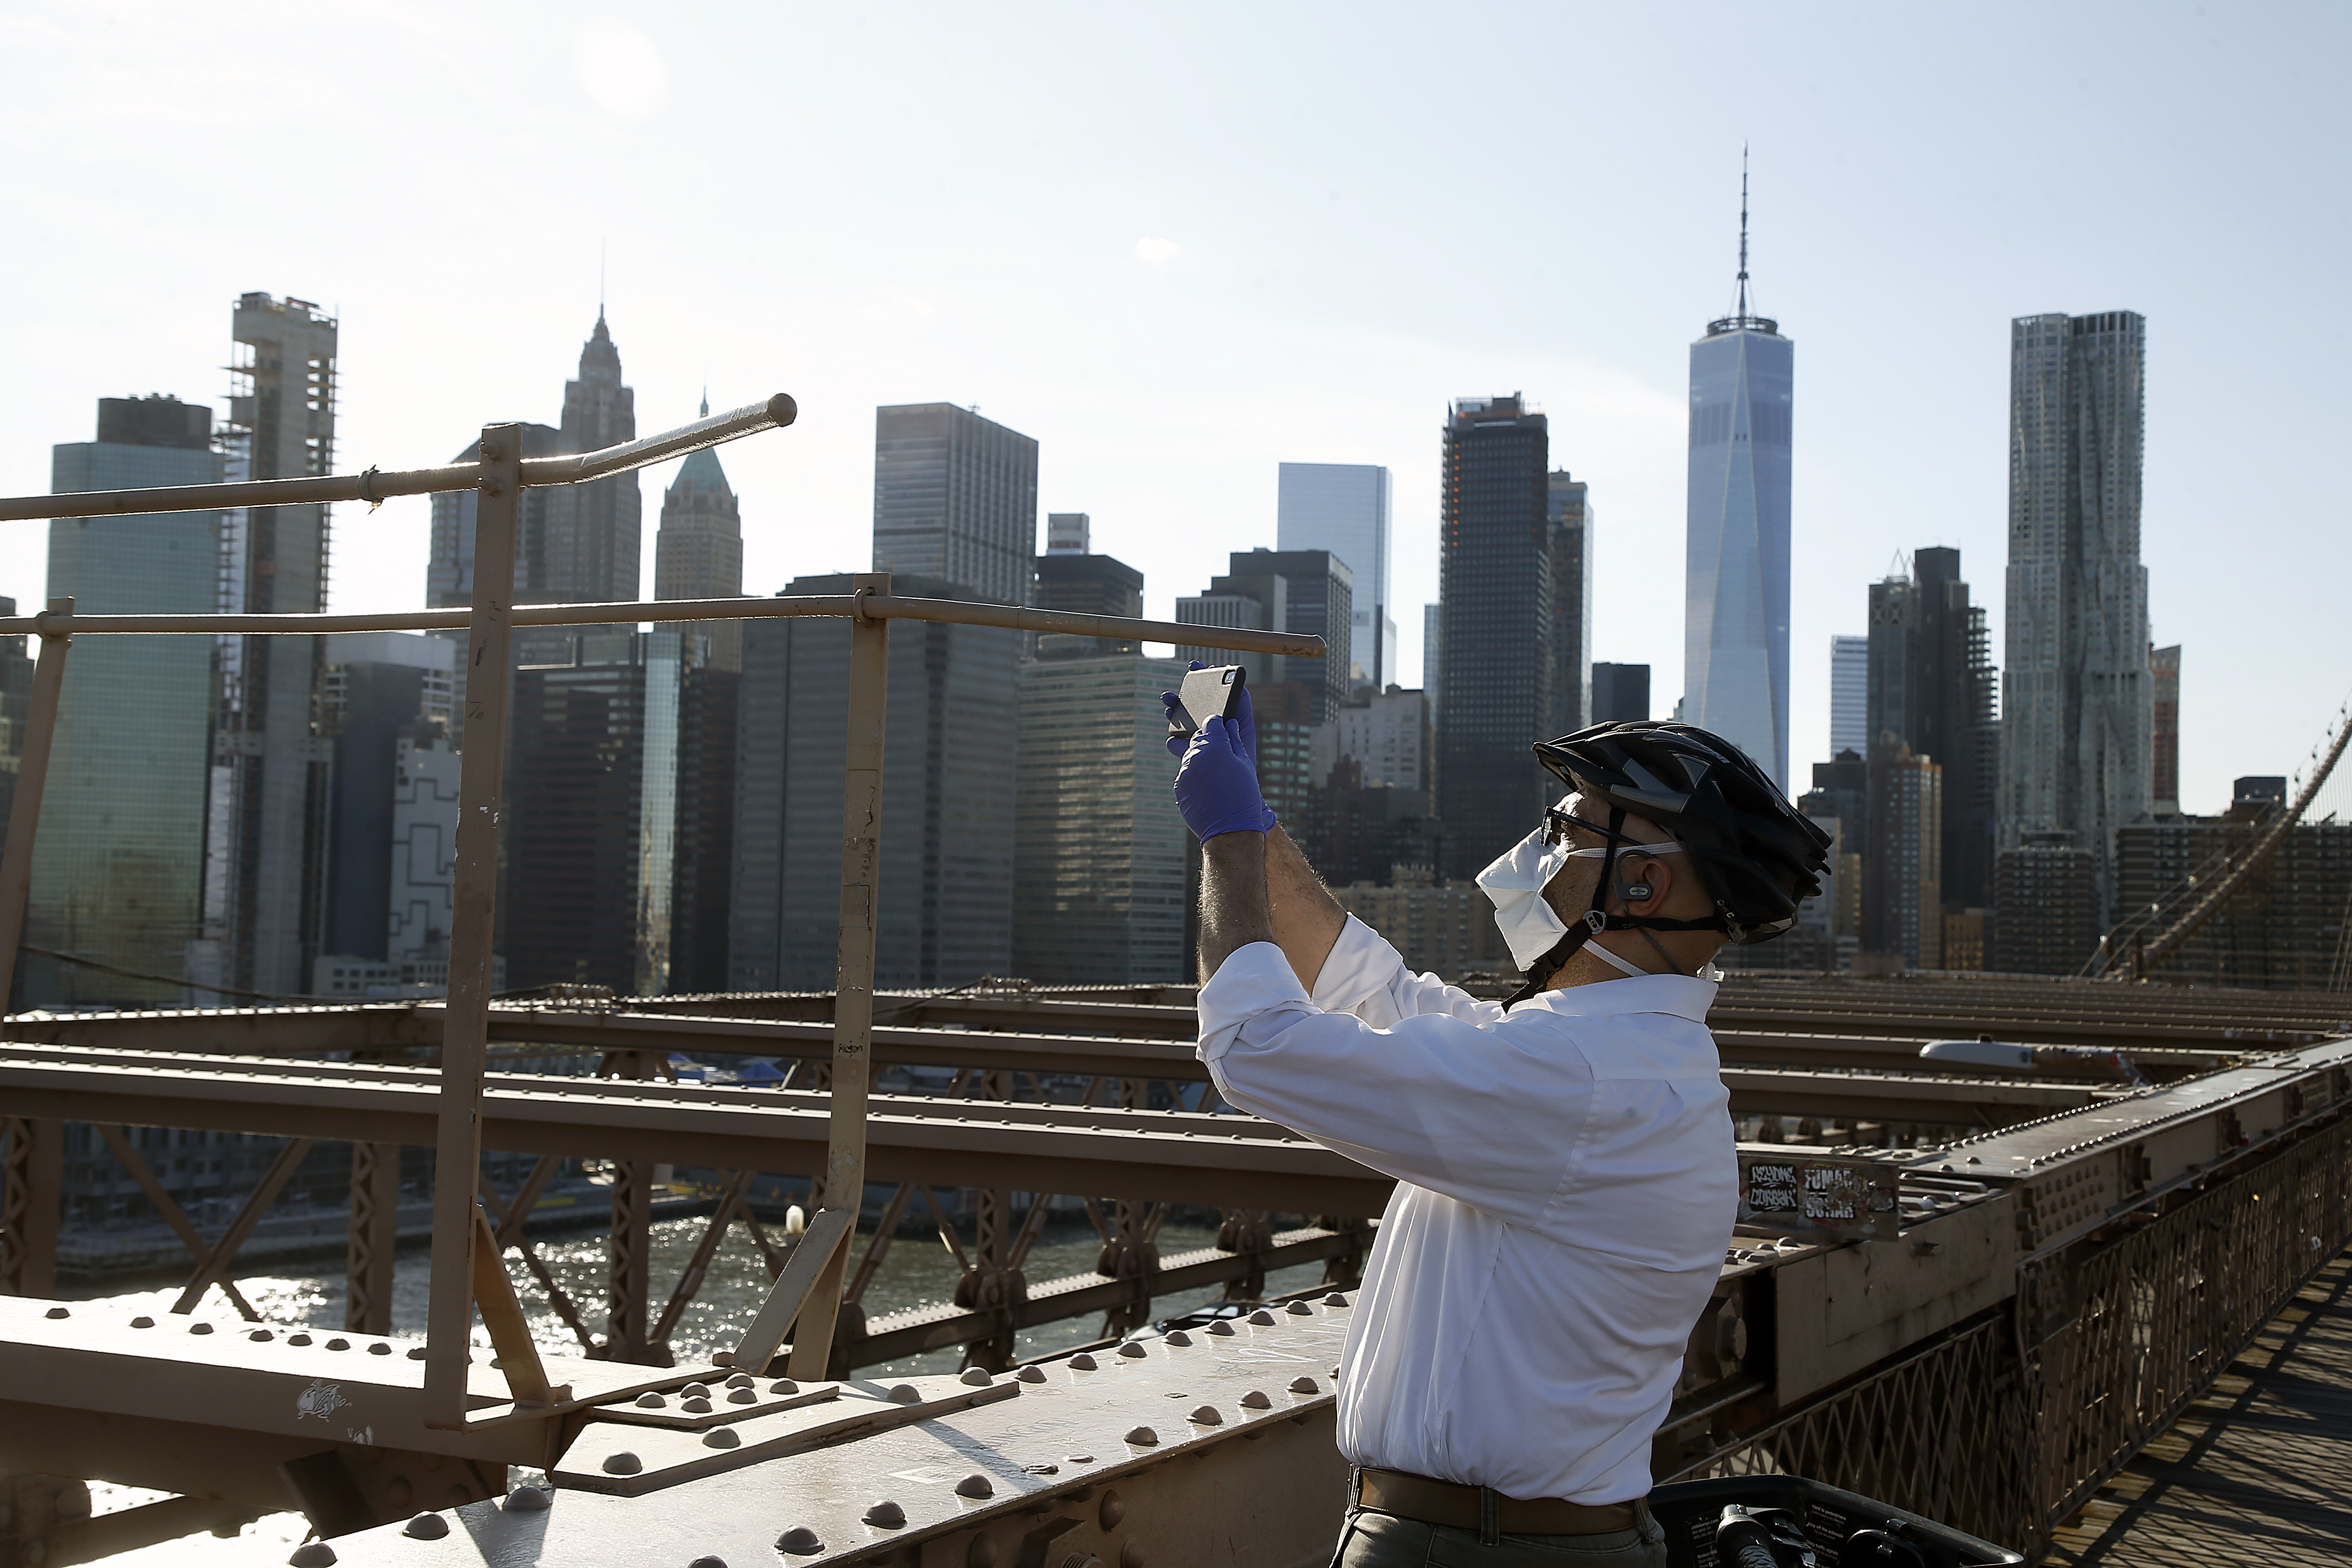 NEW YORK, NEW YORK - APRIL 28:A man takes a photograph on the Brooklyn Bridge during the coronavirus pandemic on April 28, 2020 in New York City. COVID-19 has spread to most countries around 